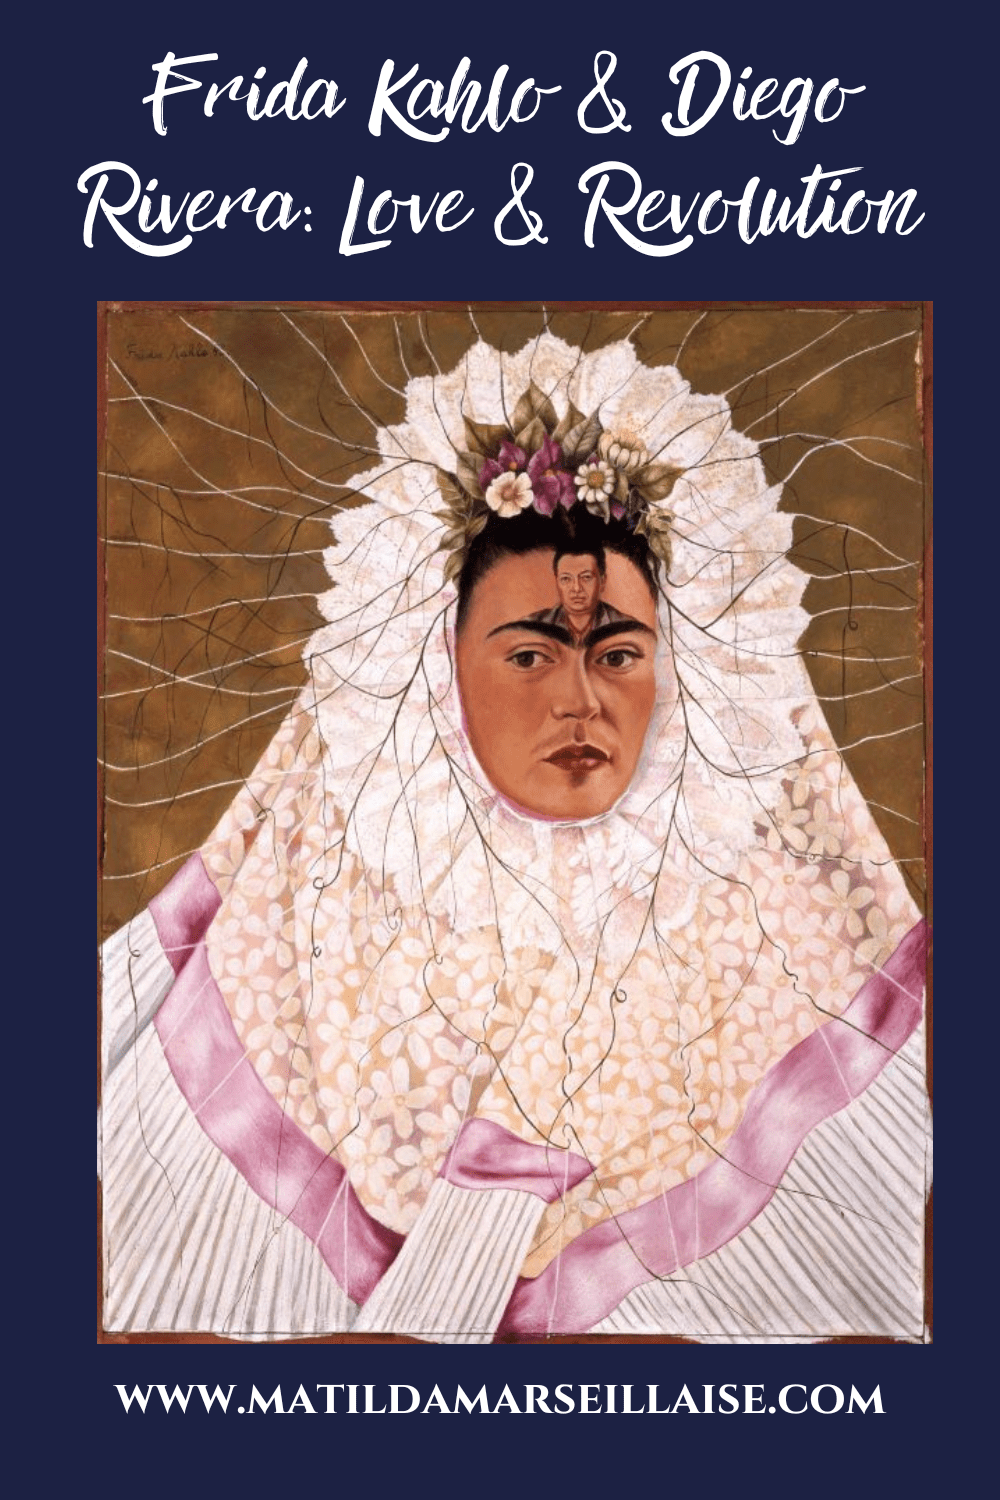 Less than 4 weeks remain to see Frida Kahlo & Diego Rivera: Love & Revolution at the Art Gallery of South Australia